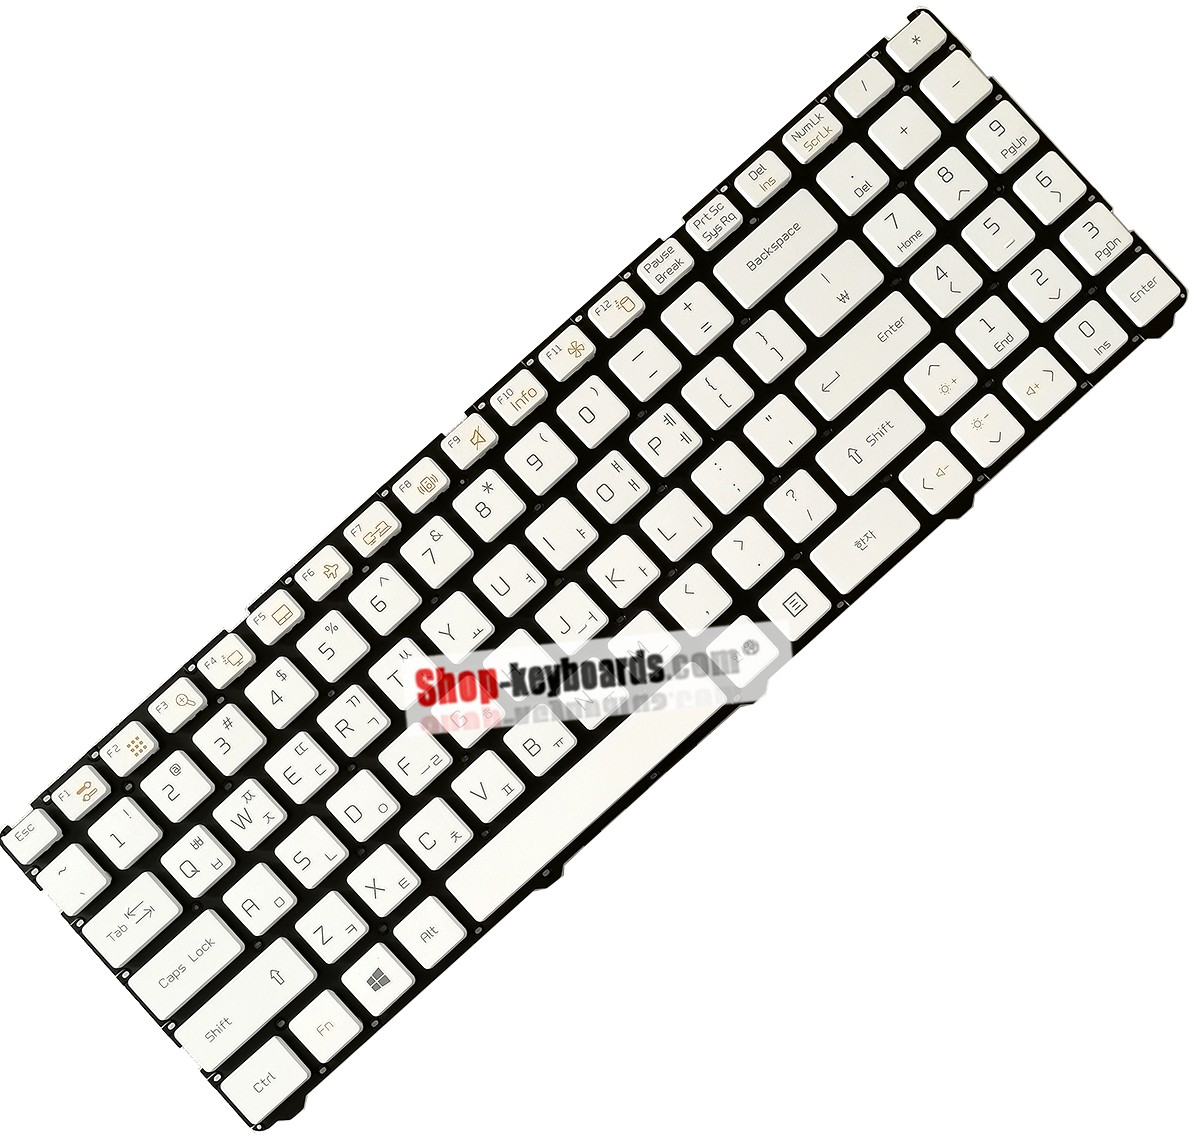 LG 15UD470-KX55K Keyboard replacement